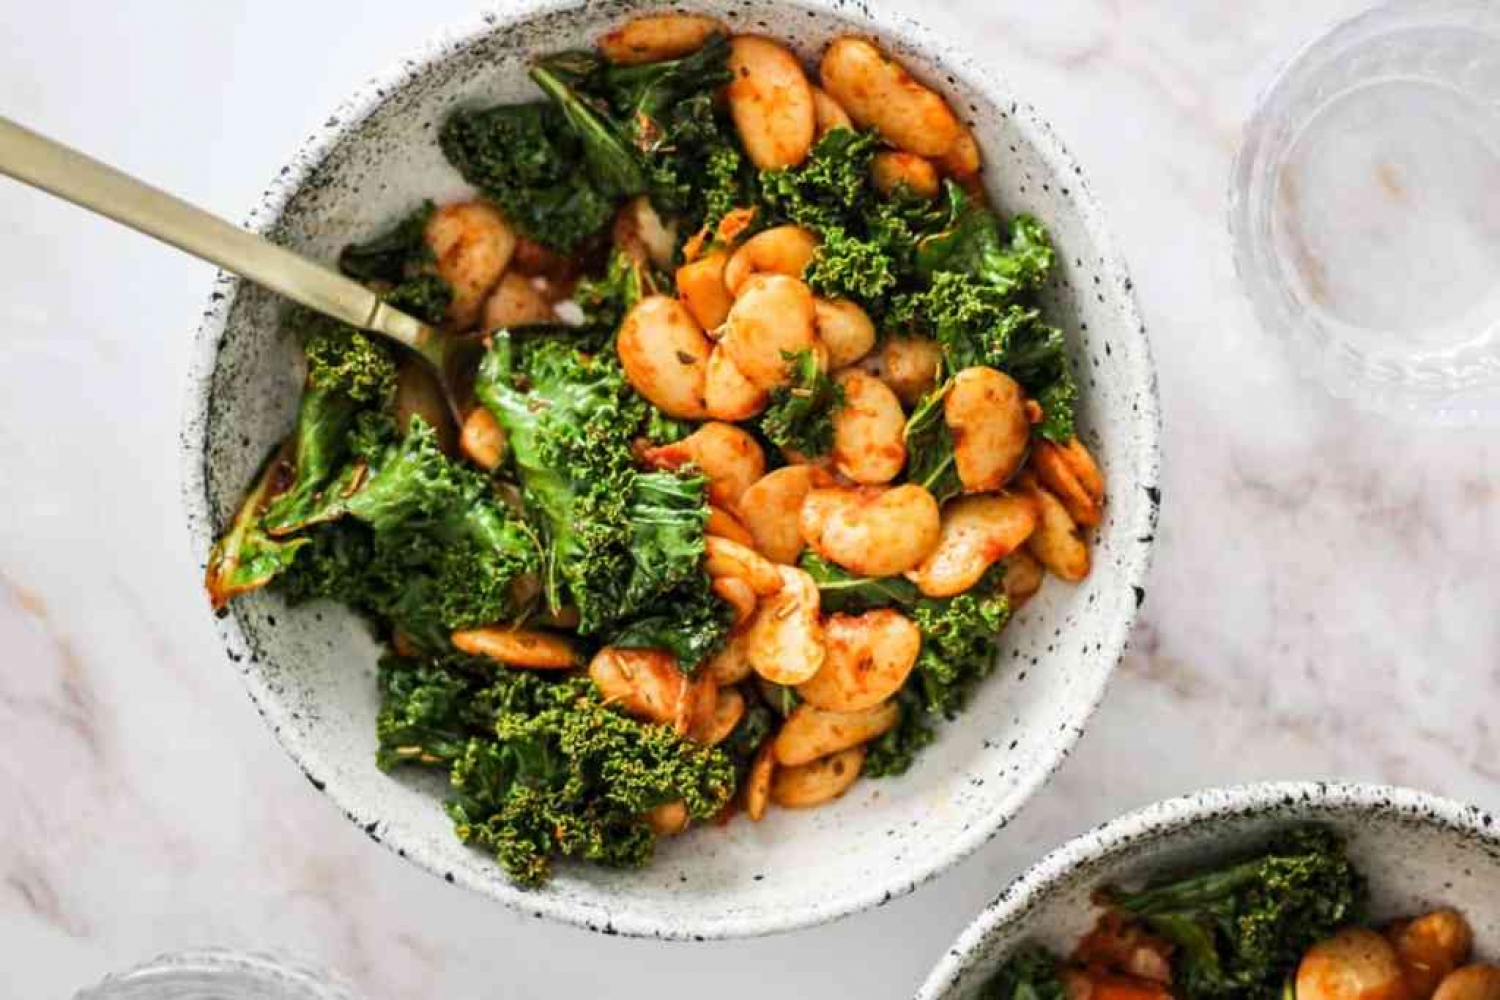 <p>Butter beans, also known as lima beans, are the star protein in this tomato-y, one-pot dish with superfood kale. Simple and tasty, it can be enjoyed as a vegan-friendly main or side. <a href="https://gratefulgrazer.com/home/butter-beans-recipe/" rel="noopener">Get the recipe here.</a></p>